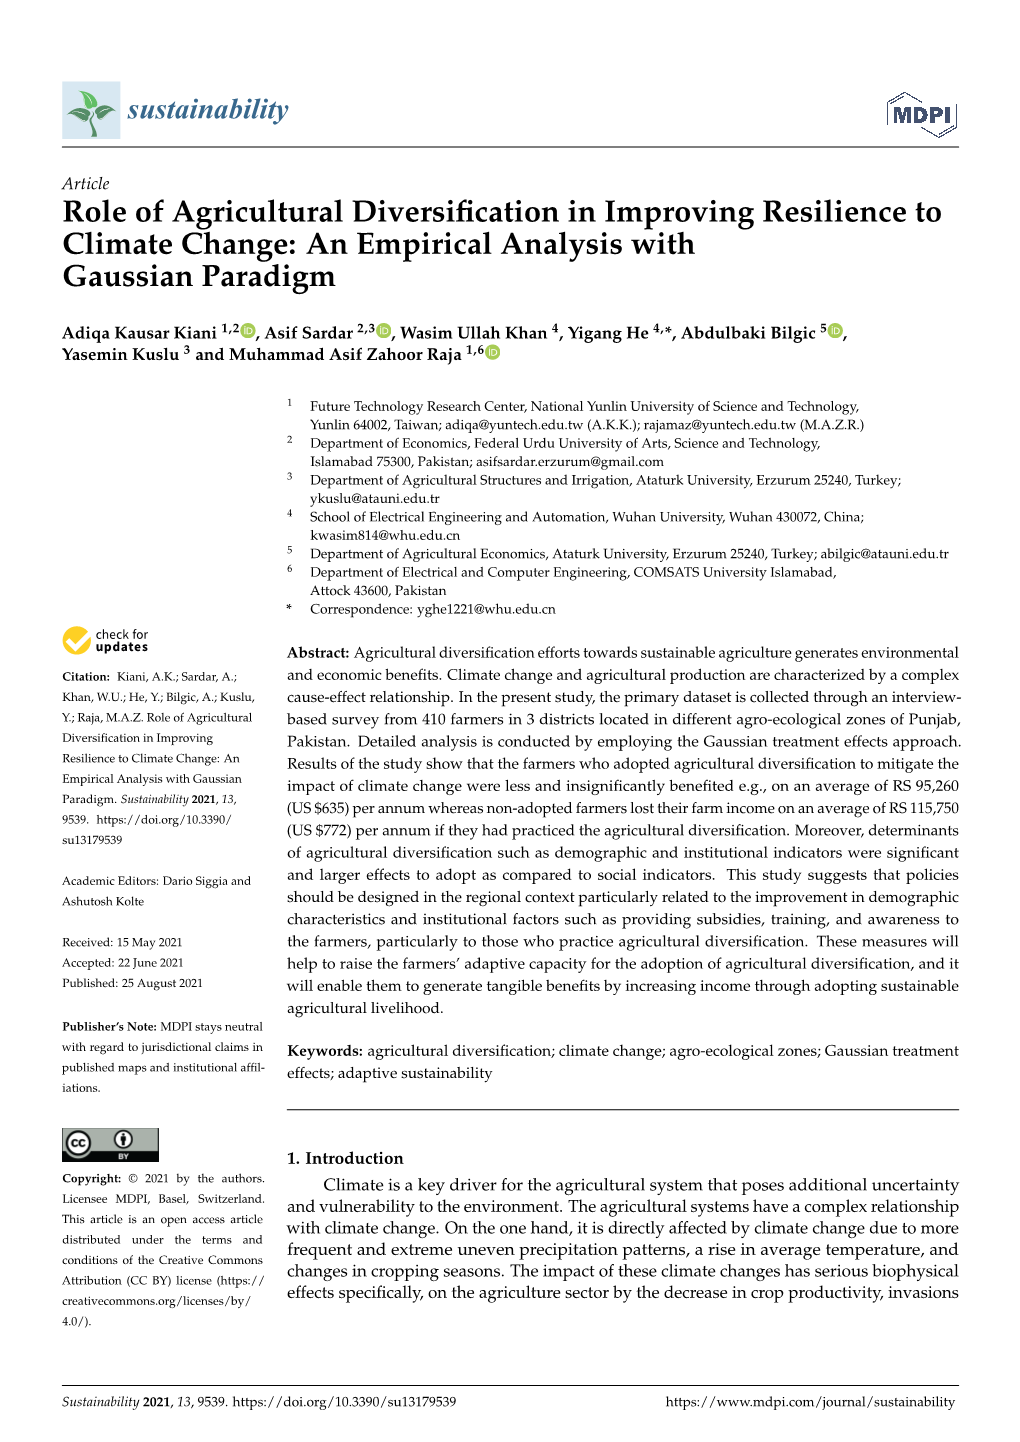 Role of Agricultural Diversification in Improving Resilience to Climate Change